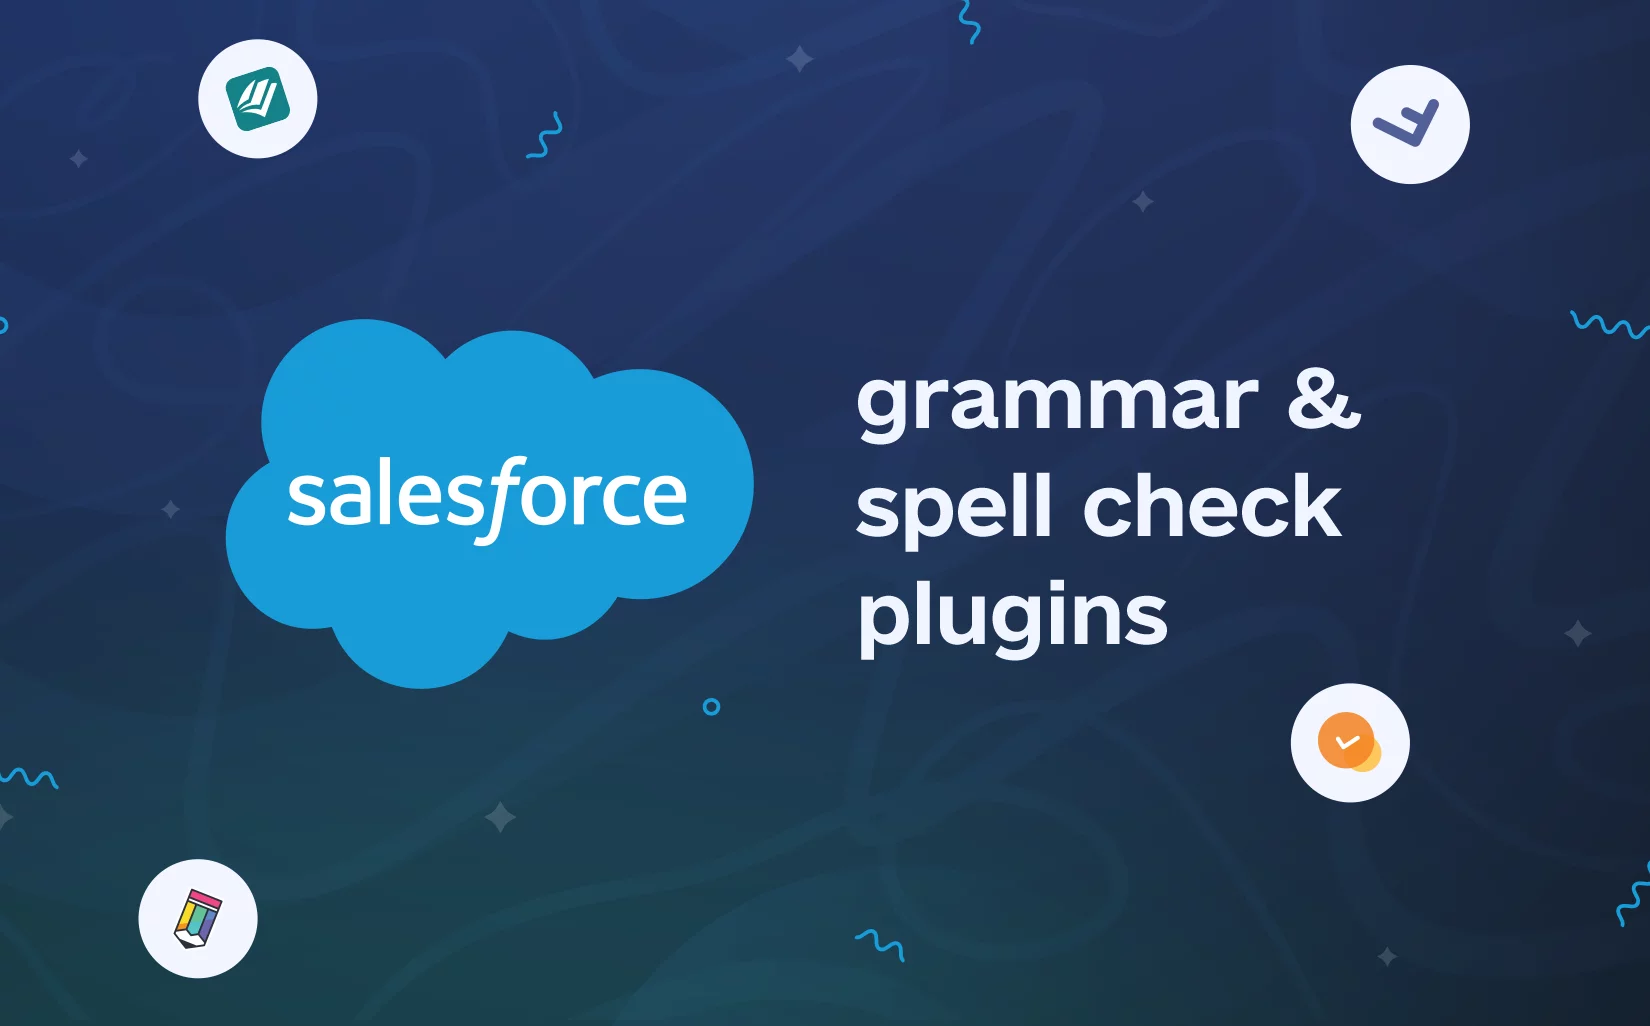 How to use grammar and spell check plugins for Salesforce